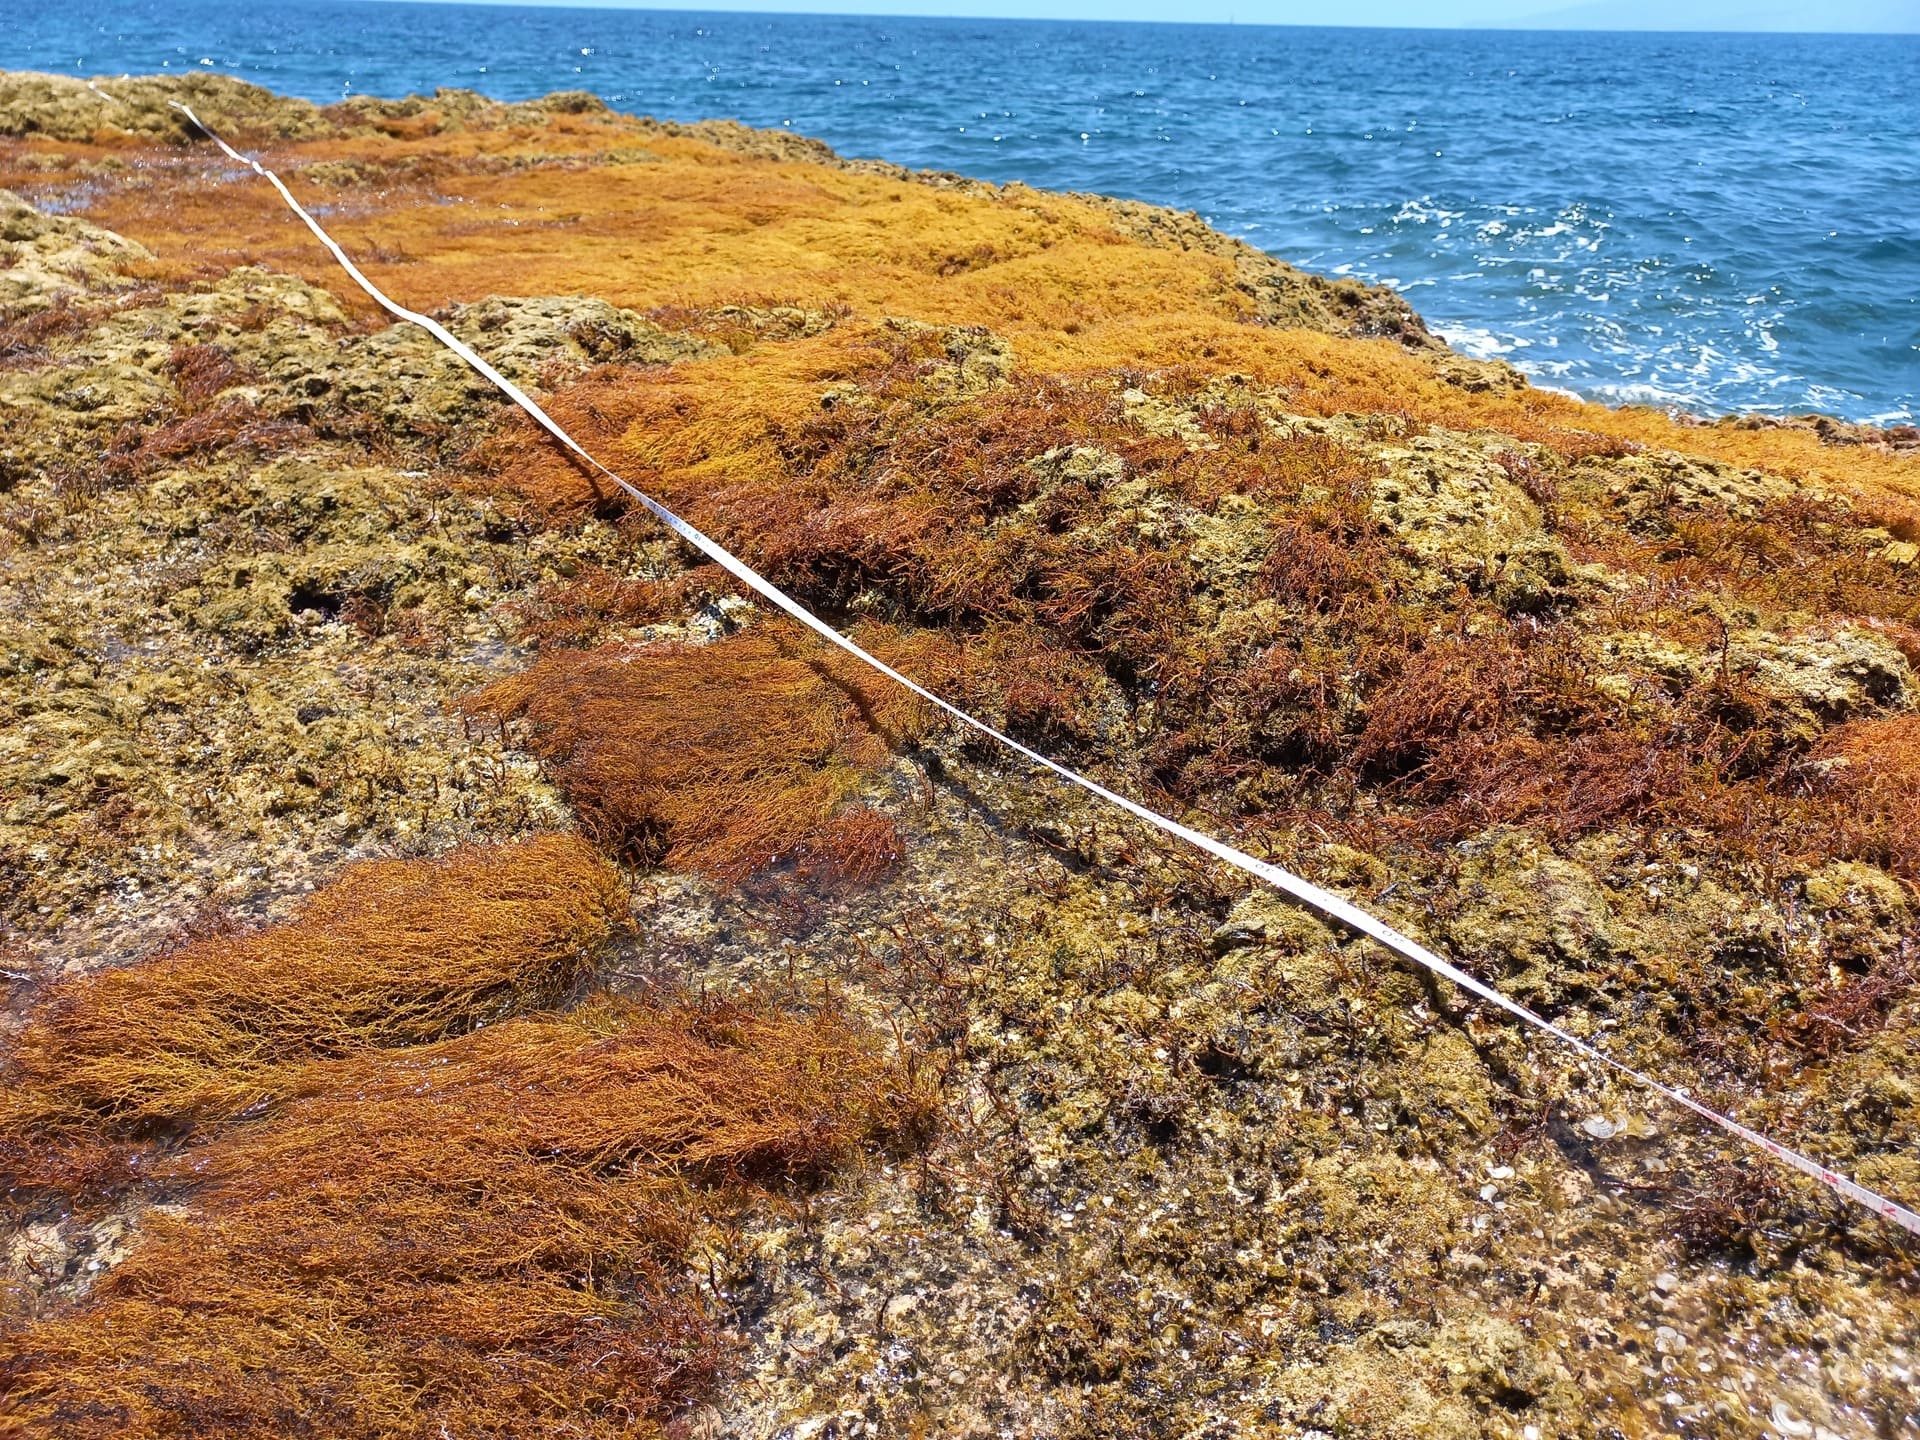 Ecological restoration of seaweed forests in Tenerife